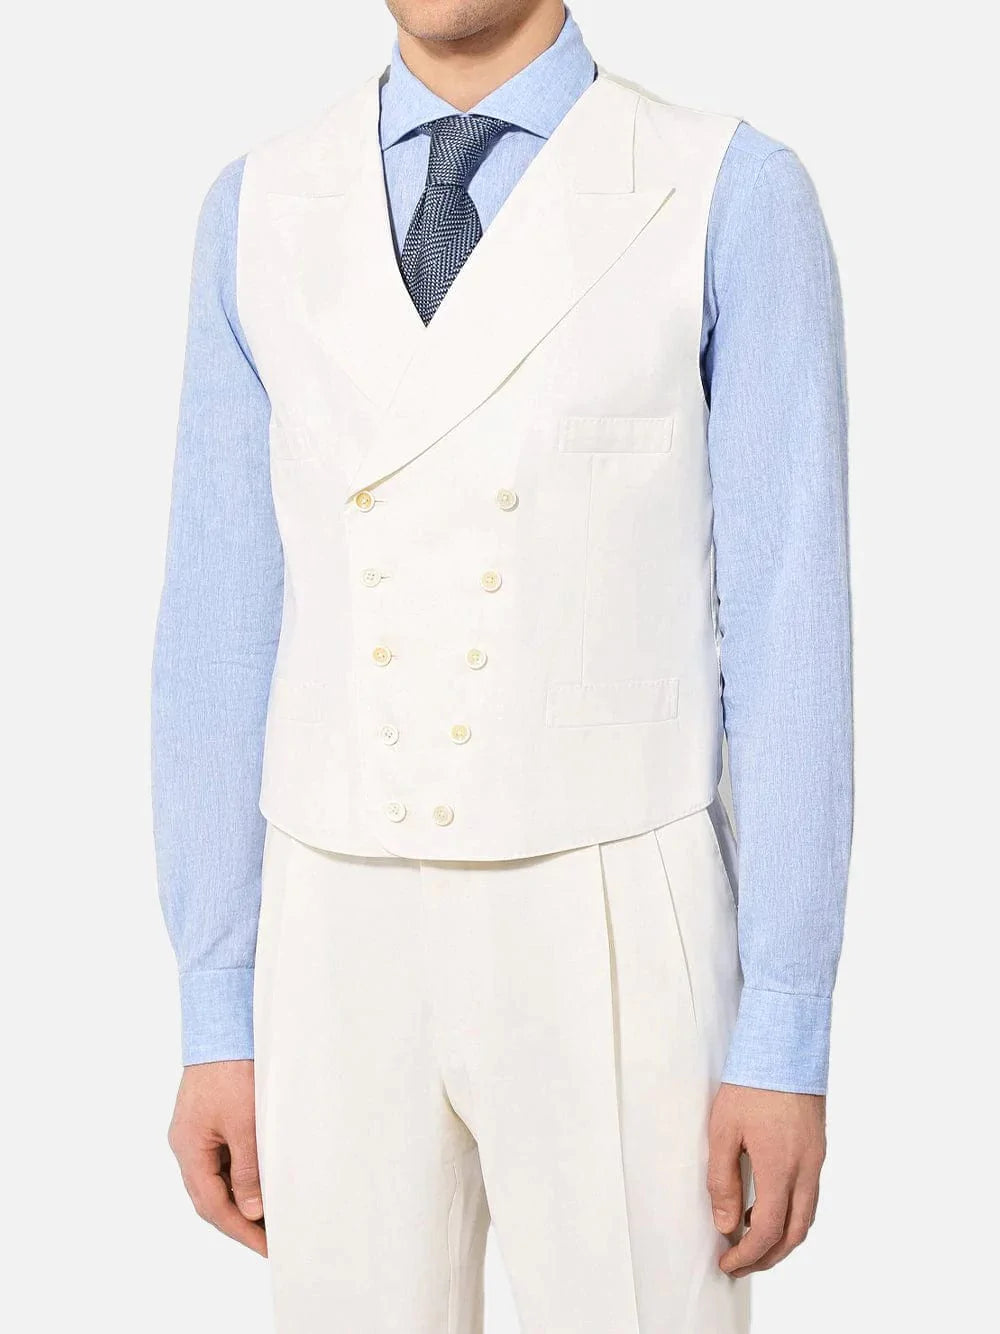 Dolce & Gabbana Double-Breasted Wool Suit Waistcoat